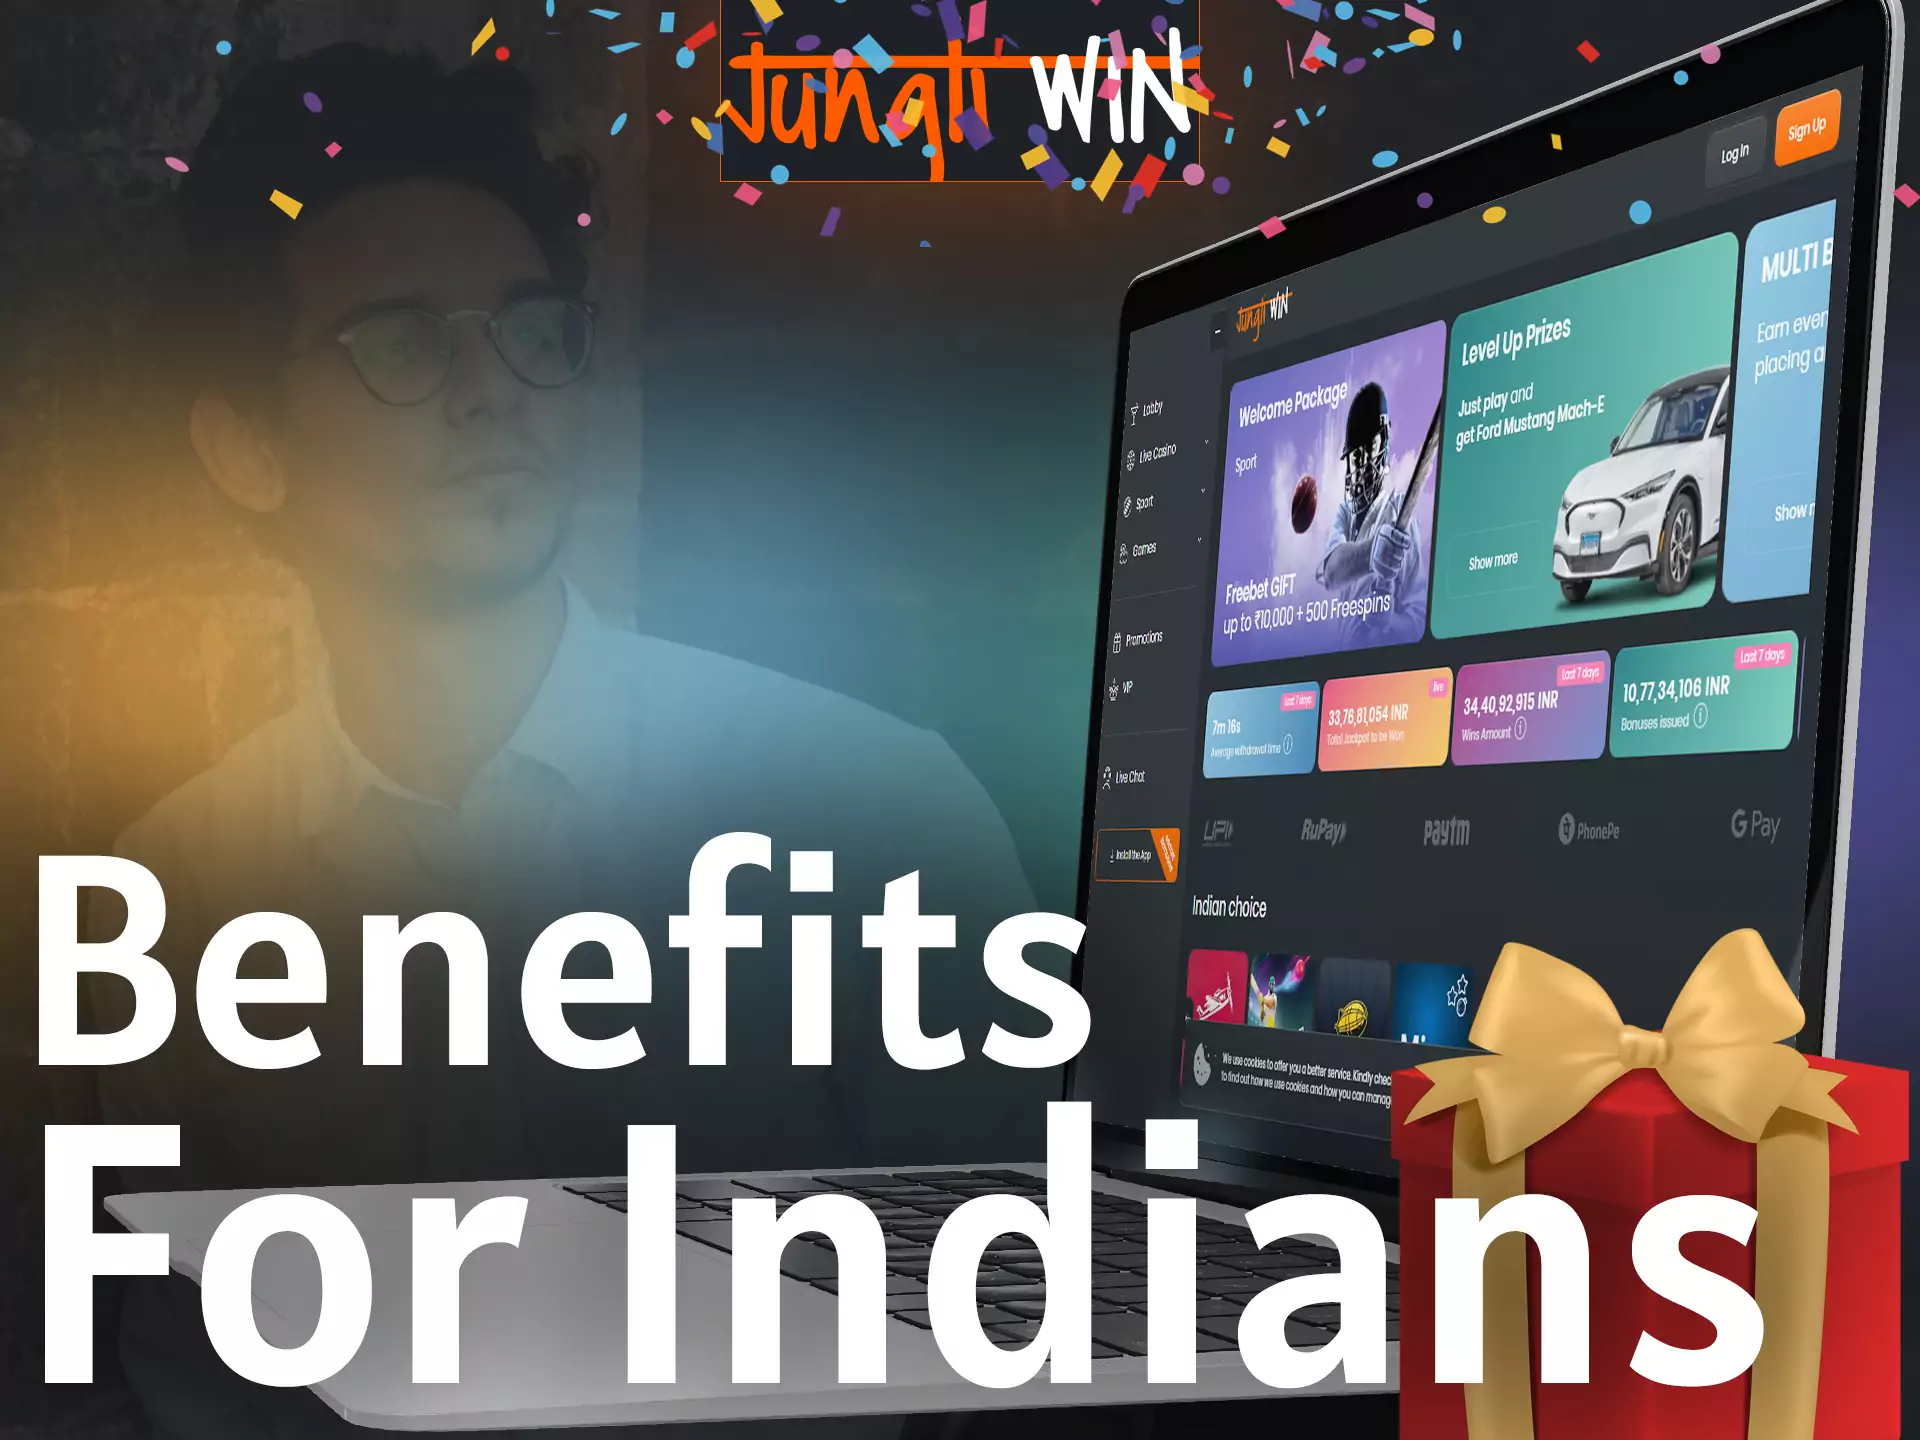 Jungliwin offers advantages to users from India.